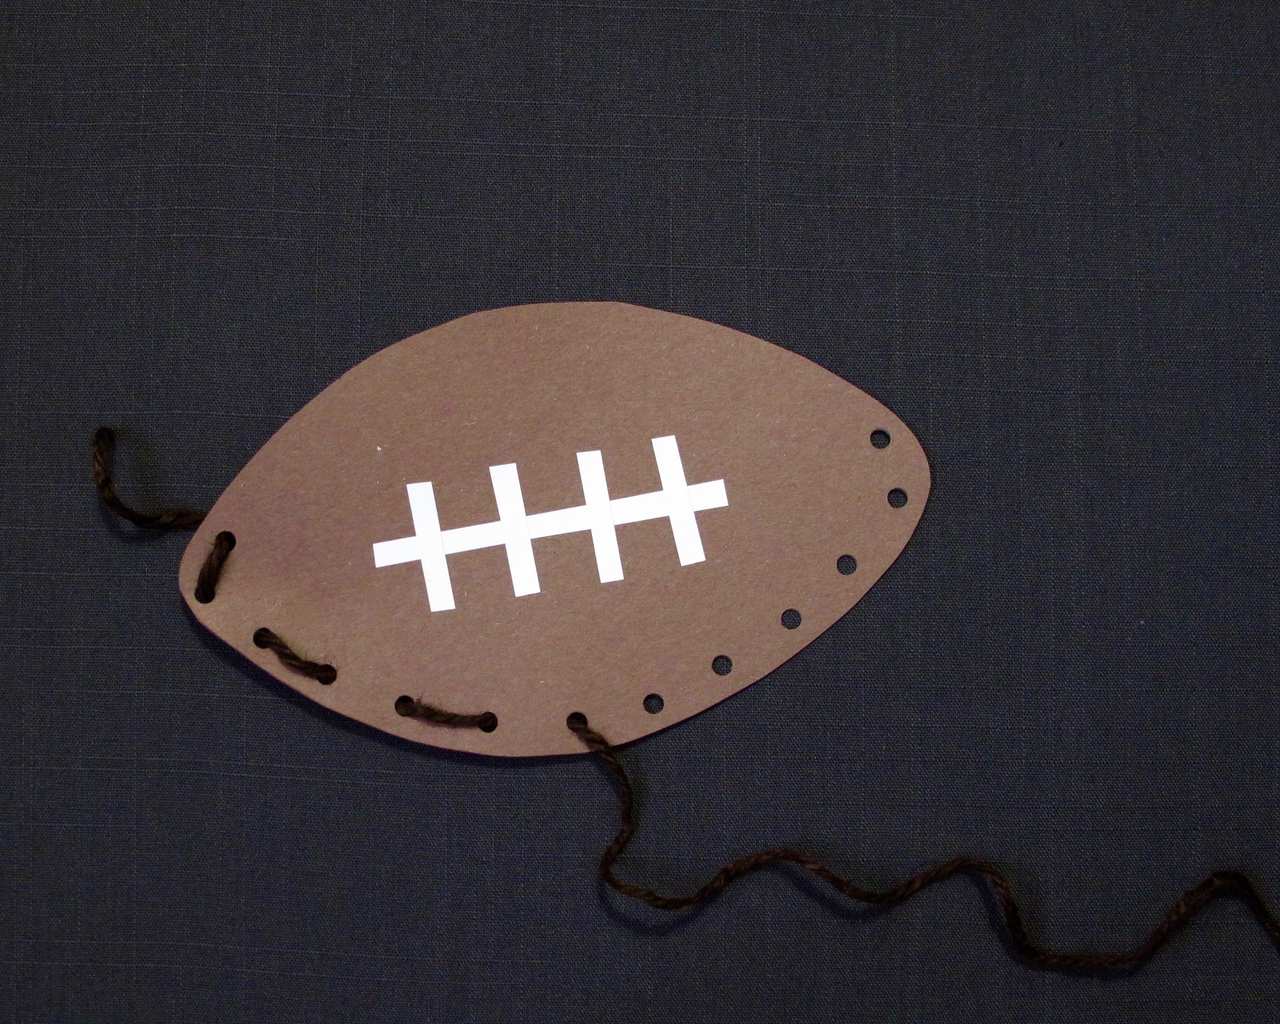 Football with stitching and woven edge on gray backgound